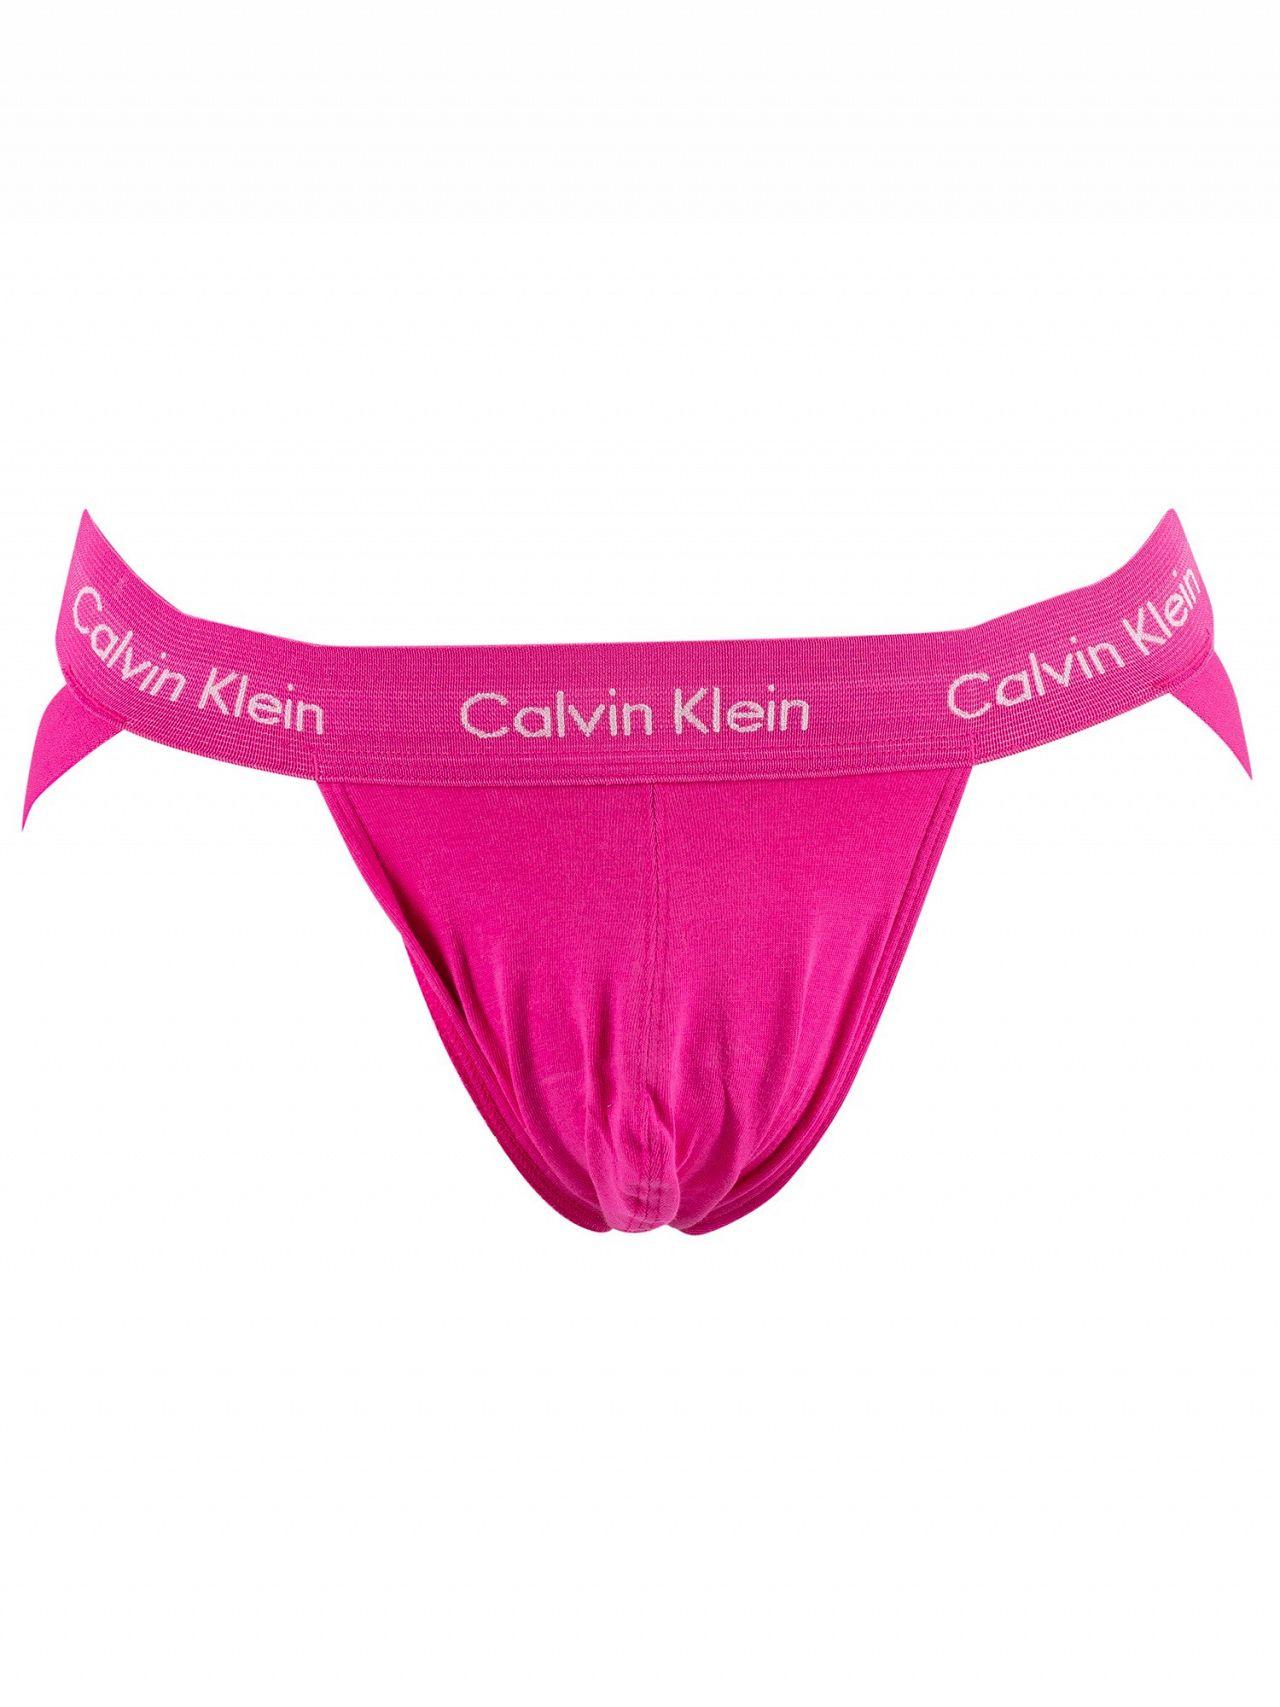 Seven jockstraps you need for your collection including Calvin Klein